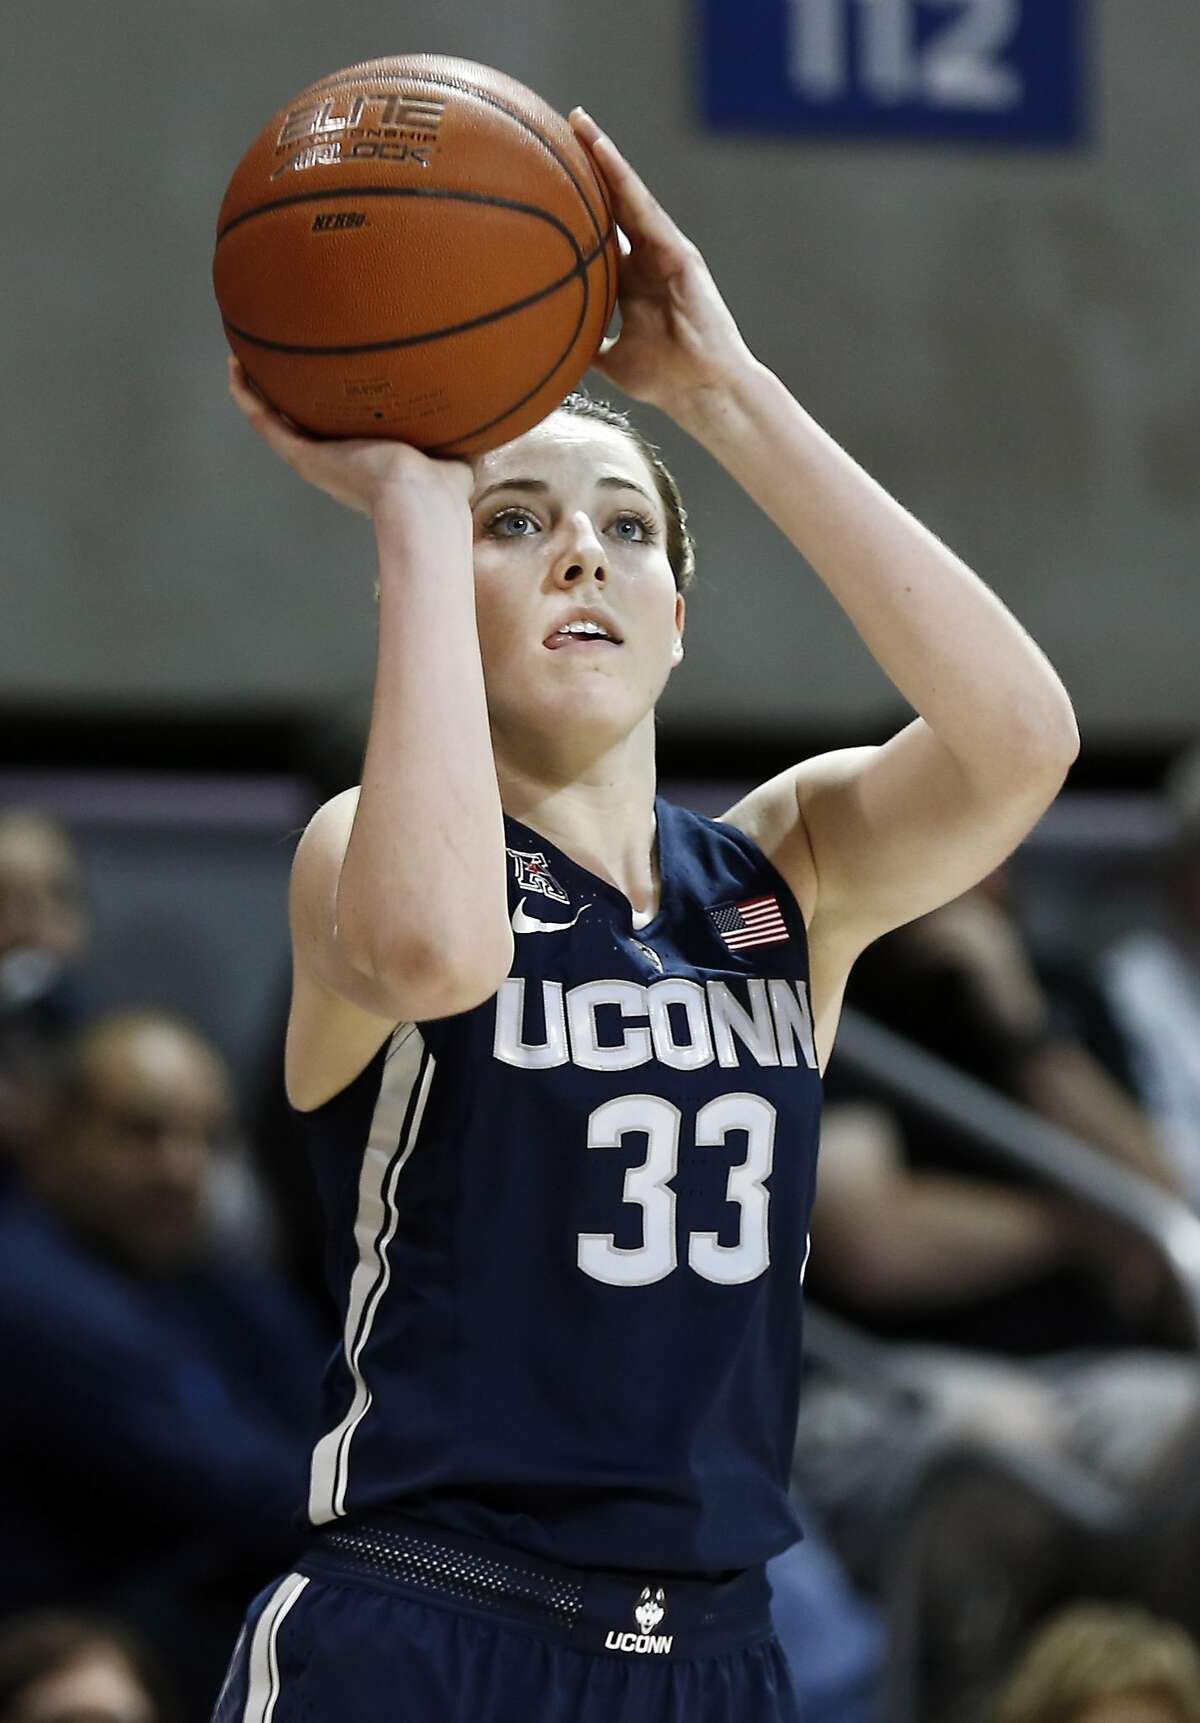 UConn bombers MosquedaLewis, Samuelson started from same spot, far away